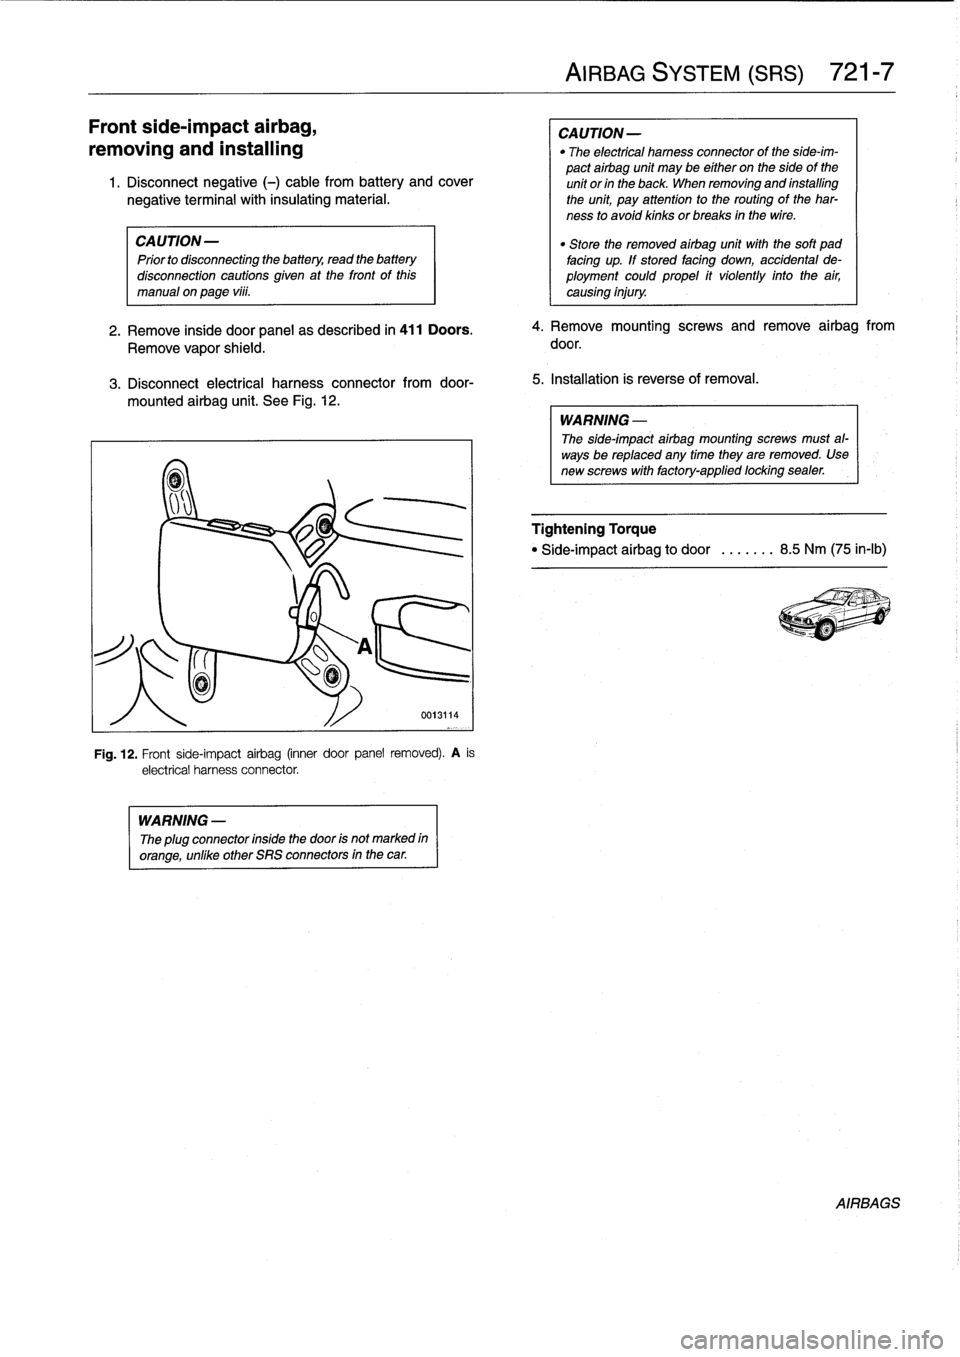 BMW M3 1993 E36 Workshop Manual 
Front
side-impact
airbag,

removing
and
installing

1
.
Disconnect
negative
(-)
cable
from
battery
and
cover

negative
terminal
with
insulating
material
.

CA
UTION-

	

"
Store
the
removed
airbag
un